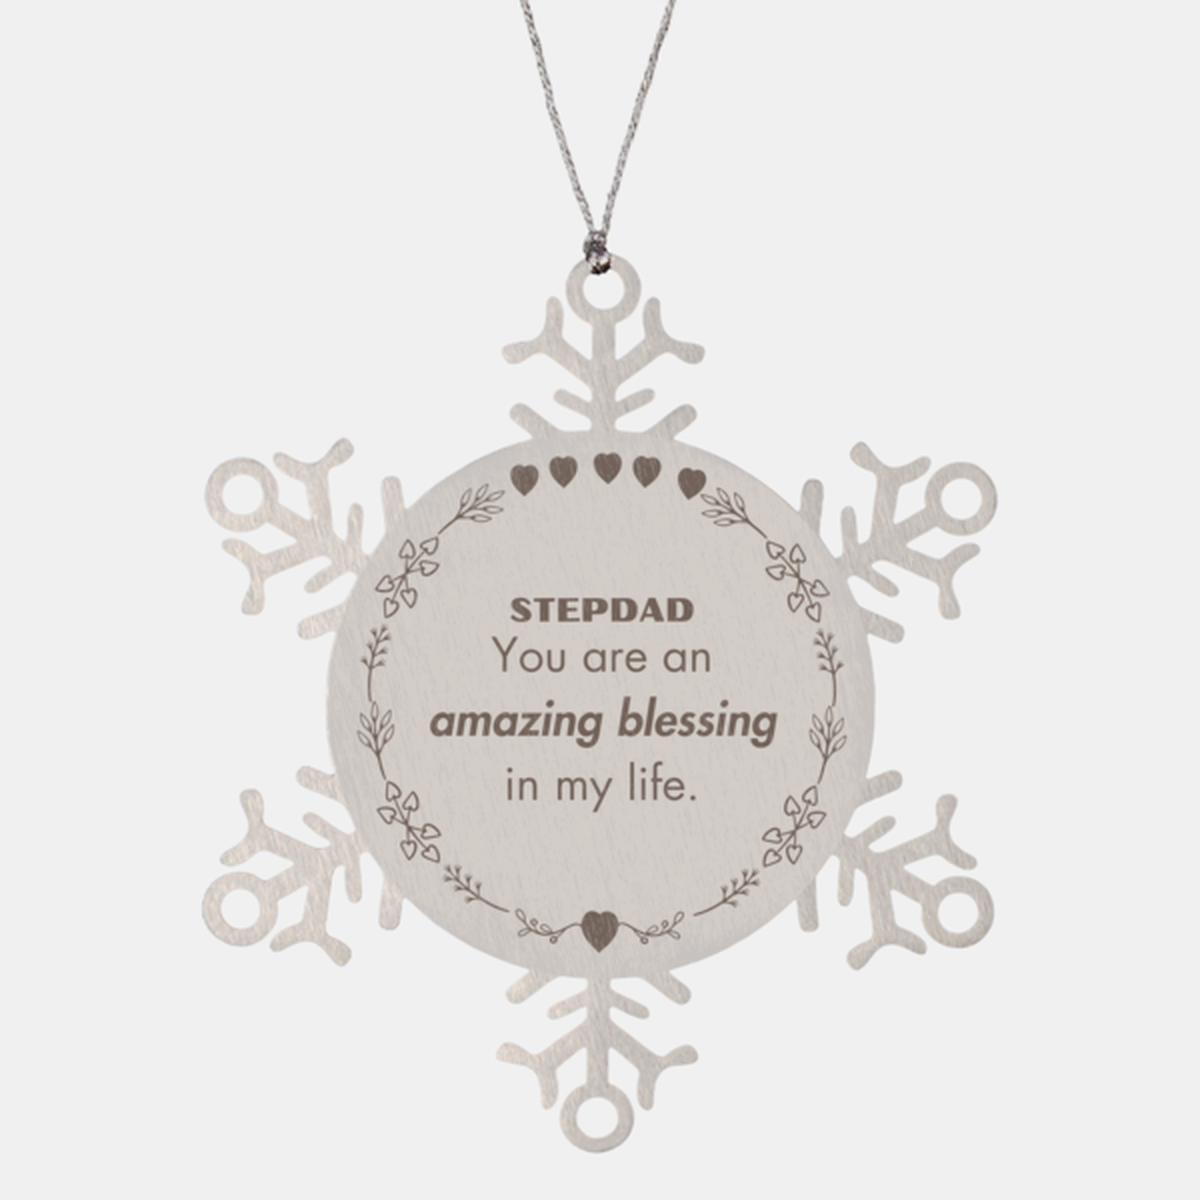 Stepdad Snowflake Ornament, You are an amazing blessing in my life, Thank You Gifts For Stepdad, Inspirational Birthday Christmas Unique Gifts For Stepdad